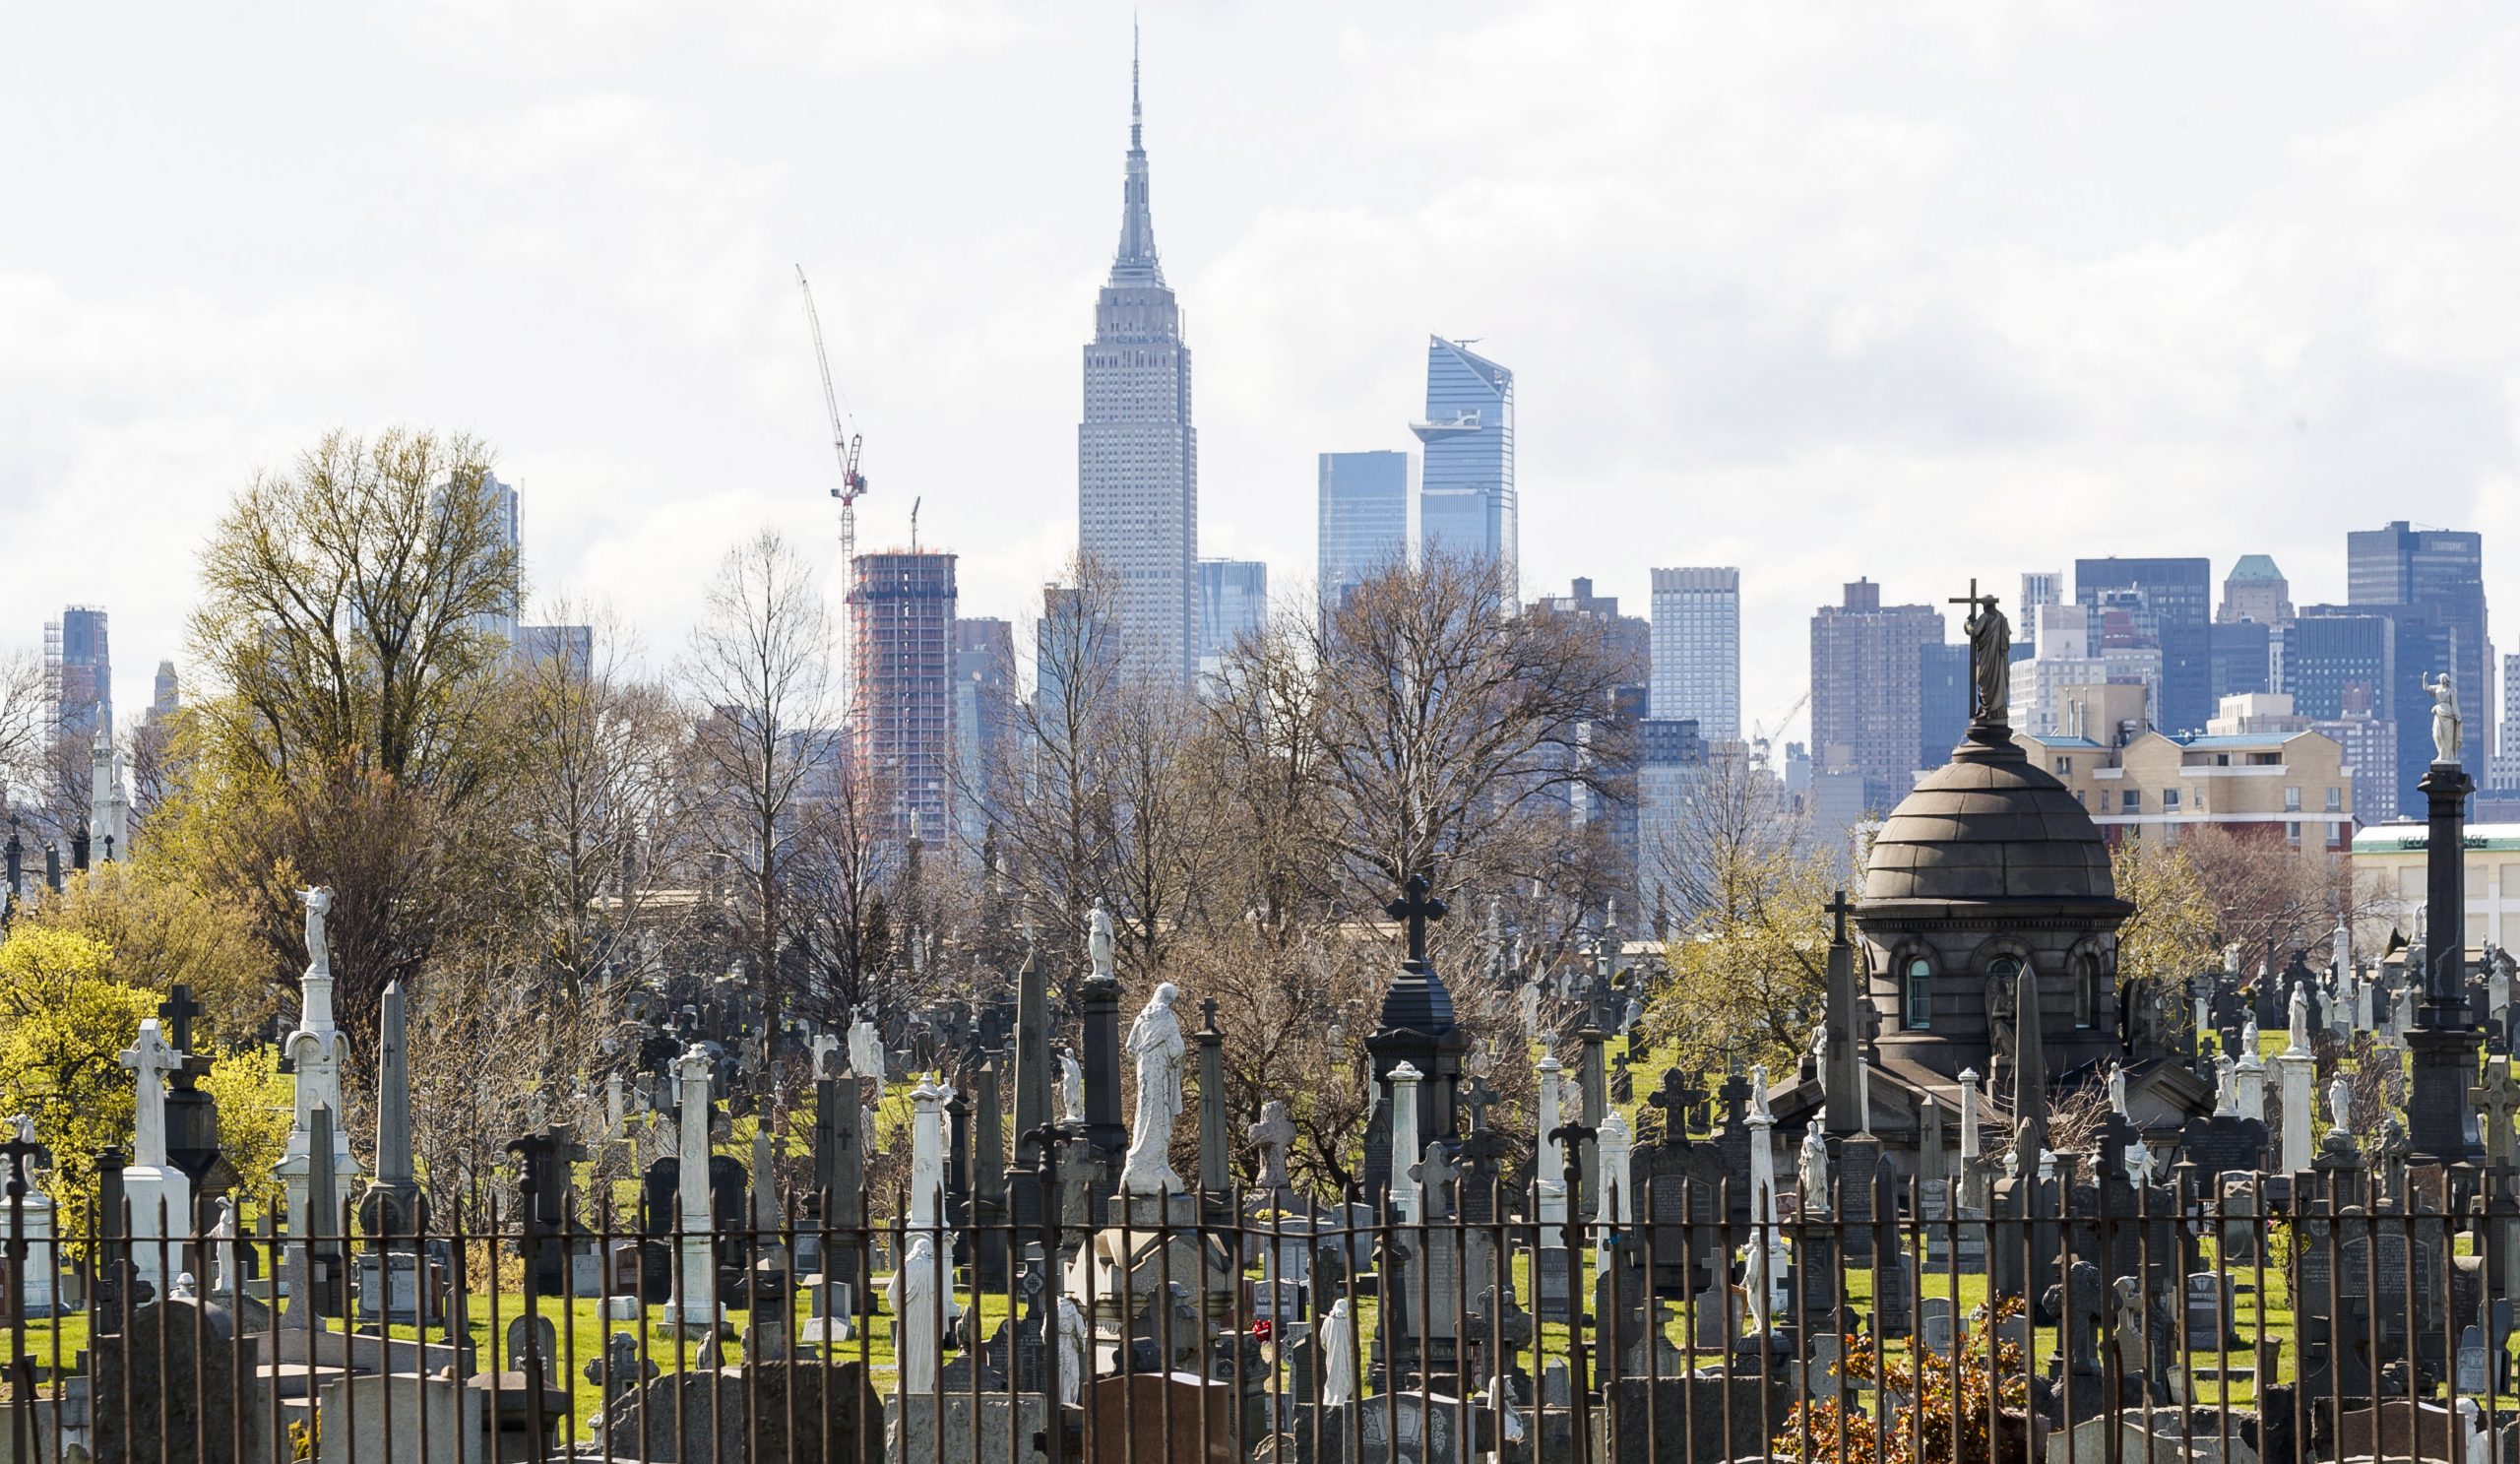 epa08354181 Gravestones and mausoleums in Calvary Cemetery in Queens are seen with the Empire State Building in the background in New York, New York, USA, on 09 April 2020. The number of patients being admitted to hospitals with COVID-19 in New York City, which is still considered to be the epicenter of the coronavirus outbreak in the United States, grew by the smallest amount in weeks but 799 people died between Wednesday and Thursday, which was another single day high for deaths.  EPA/JUSTIN LANE